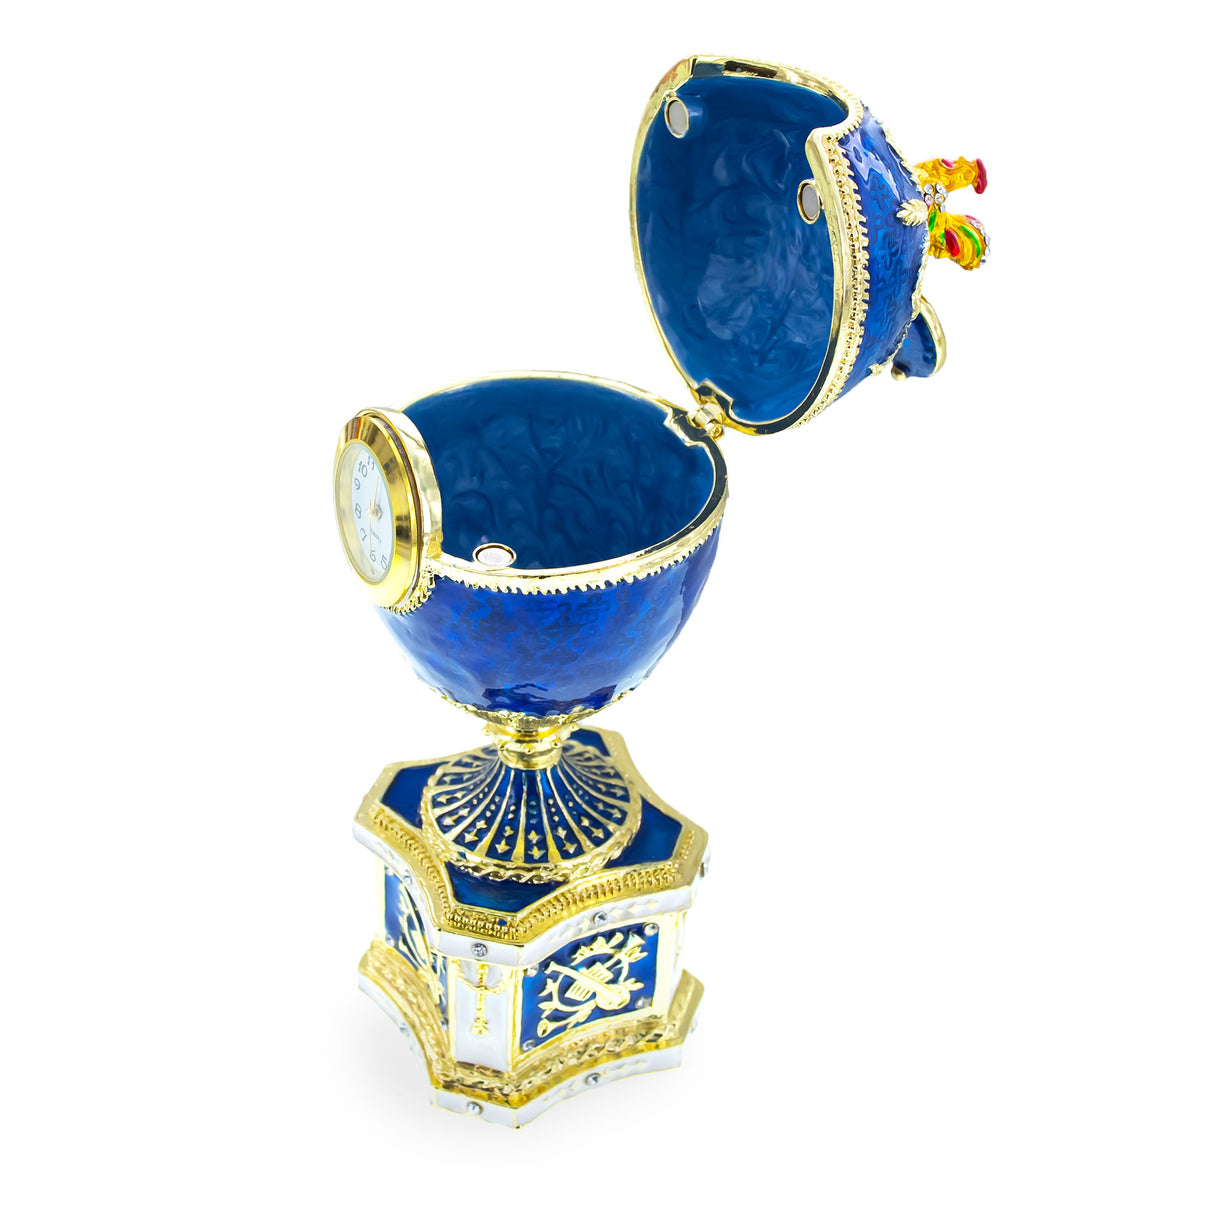 1904 Kelch Chanticleer Blue Enamel Royal Imperial Easter Egg with Clock ,dimensions in inches: 6.4 x 6.59 x 3.2